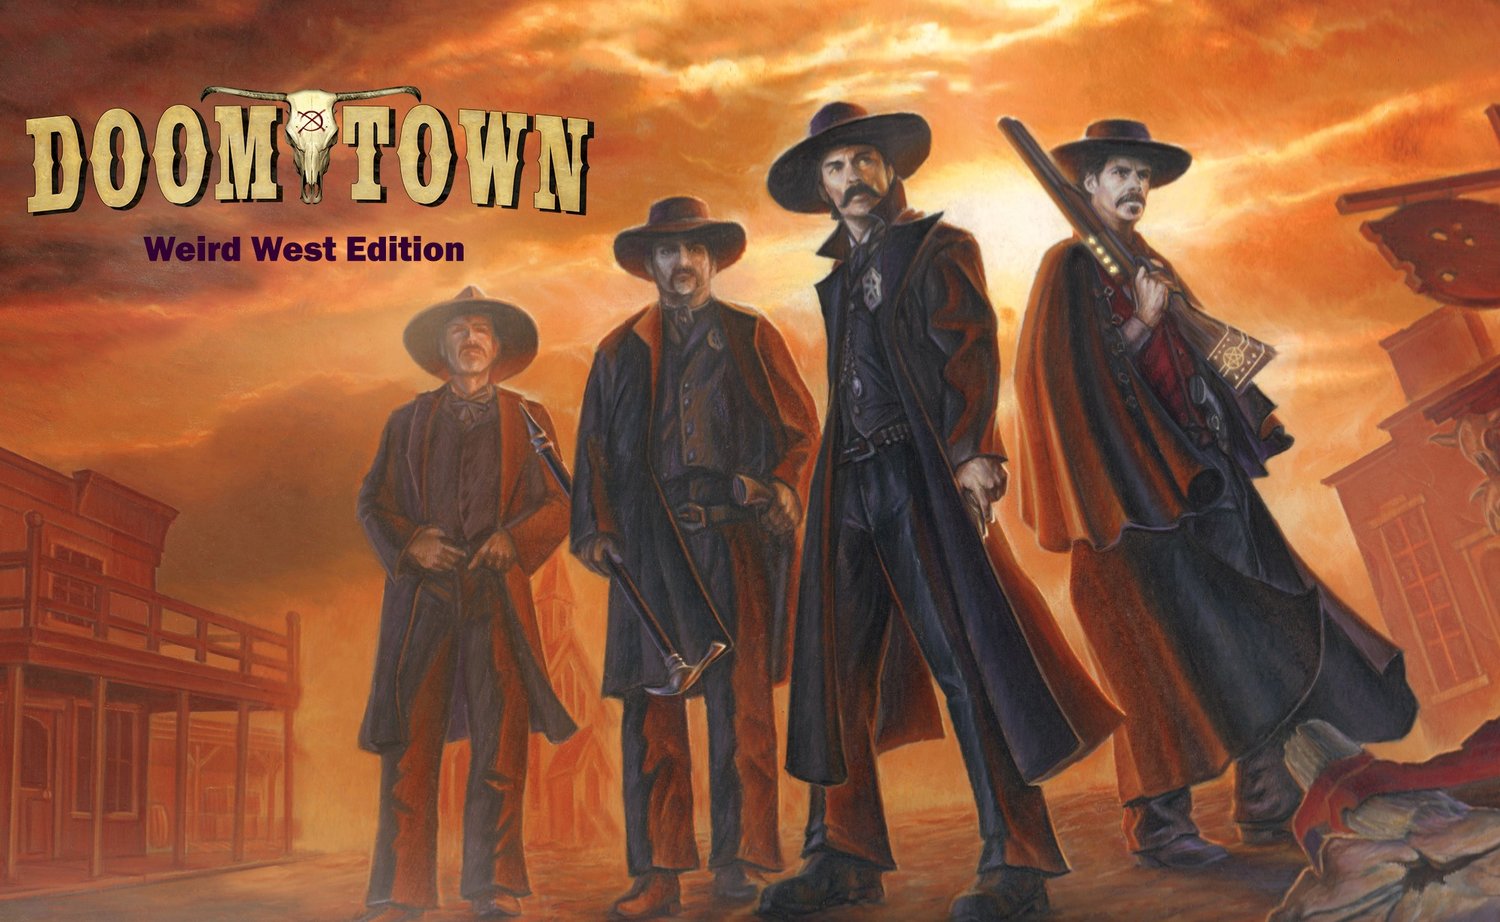 Doomtown: Weird West Edition is a reworking of a fan-favorite card game.